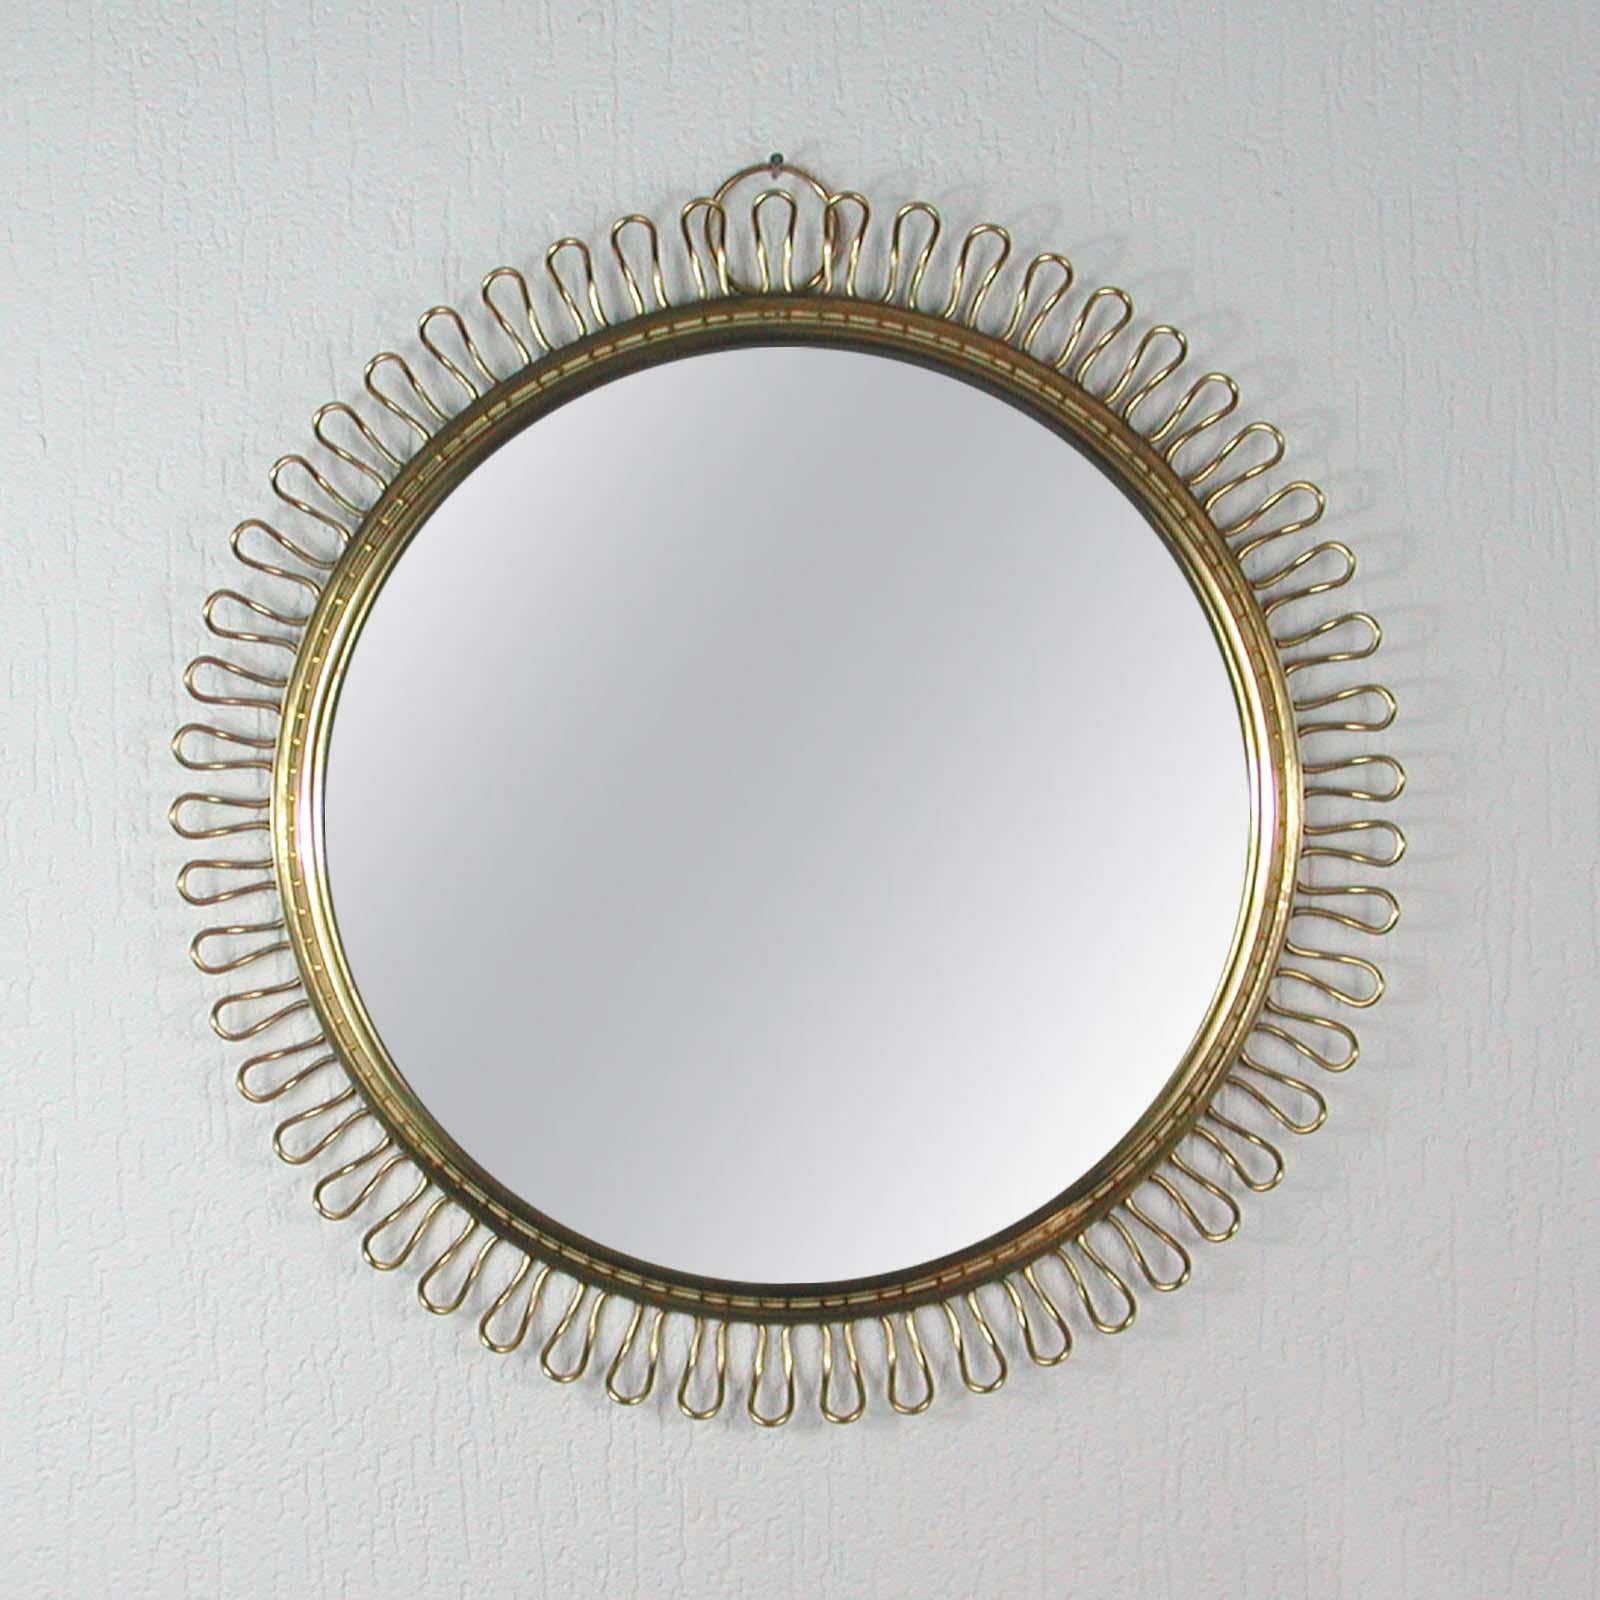 This beautiful brass loop wall mirror was designed in Sweden by Josef Frank for Svenskt Tenn in the 1950s. The brass frame with nice warm vintage patina. The mirror flawless. The rear with teak veneer.

Measures: Diameter app.: 17.8